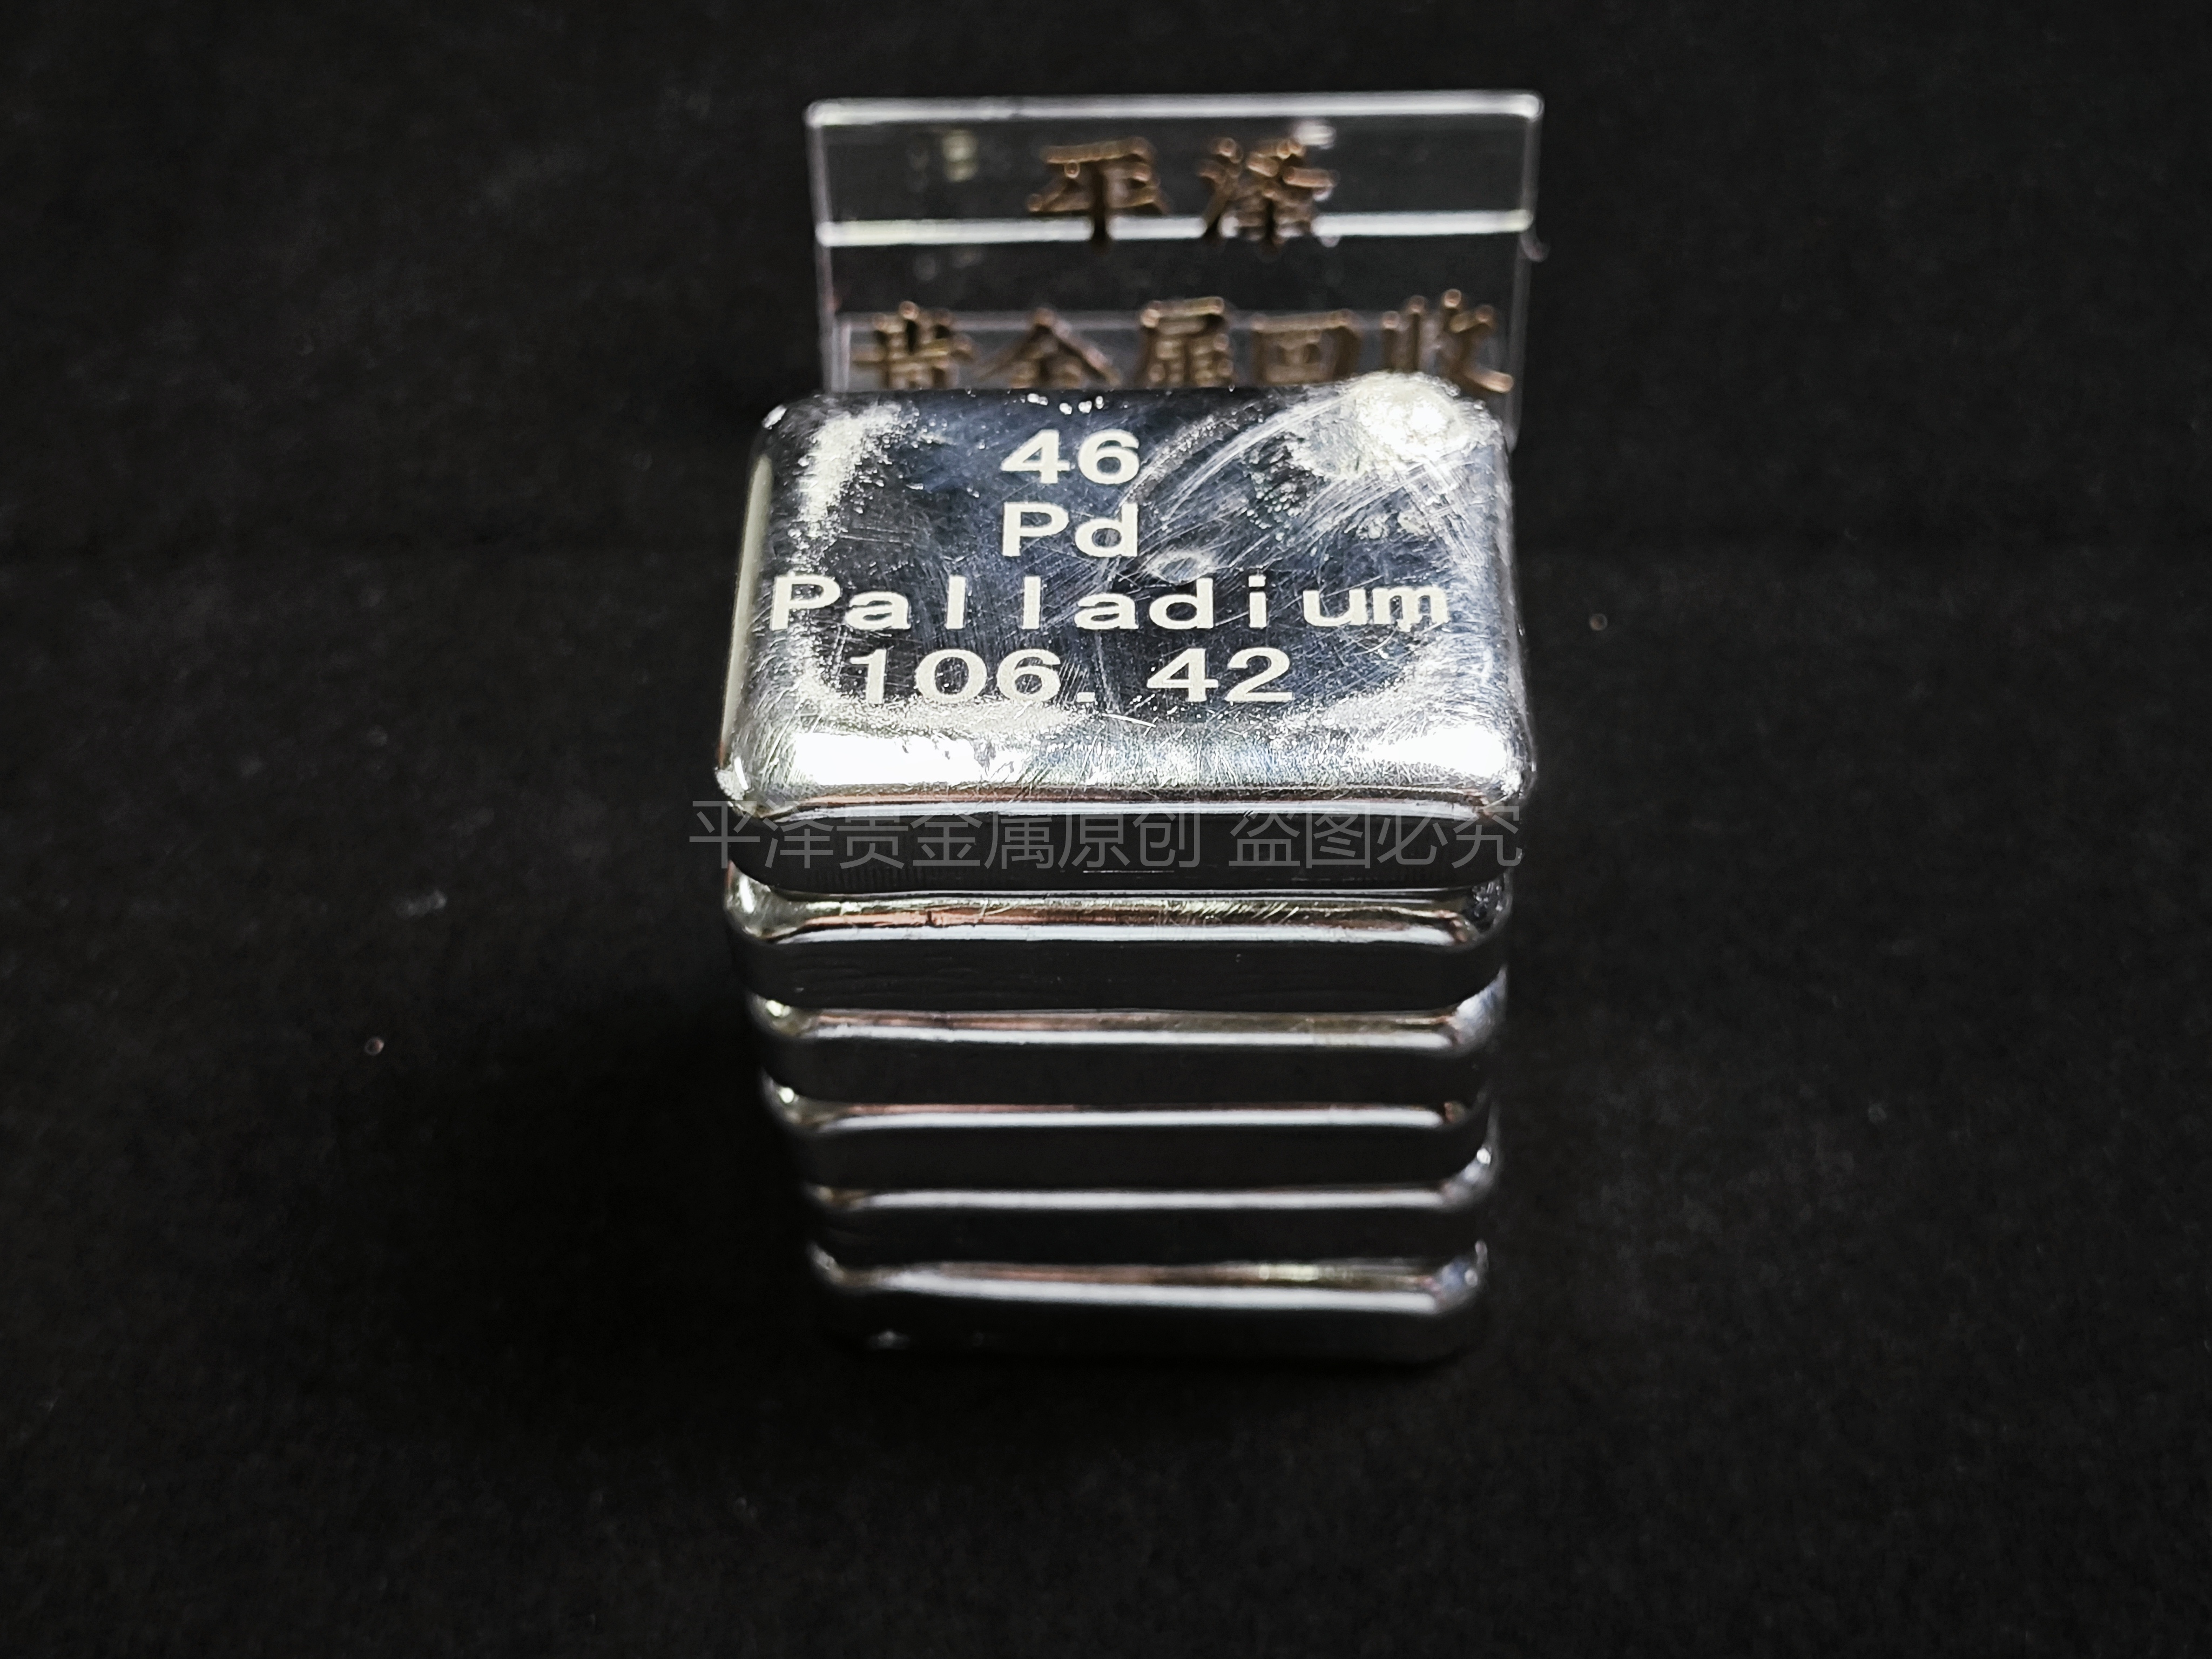 What are the palladium containing wastes and the price of recycling palladium containing wastes